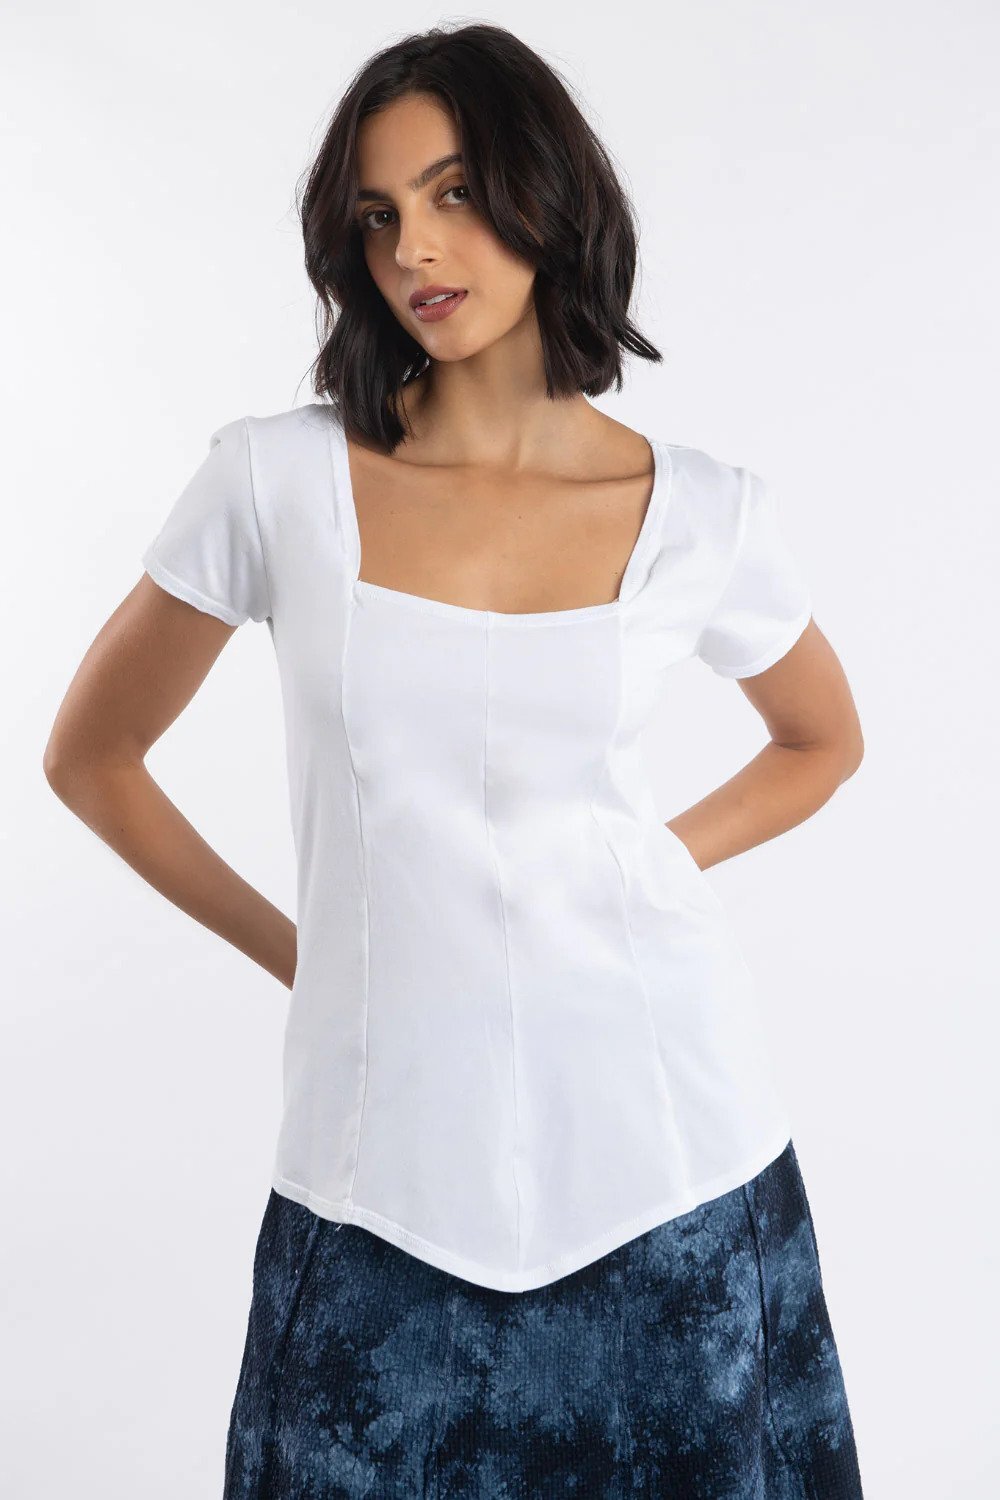 Sweetheart Square Neck Tee Front White.